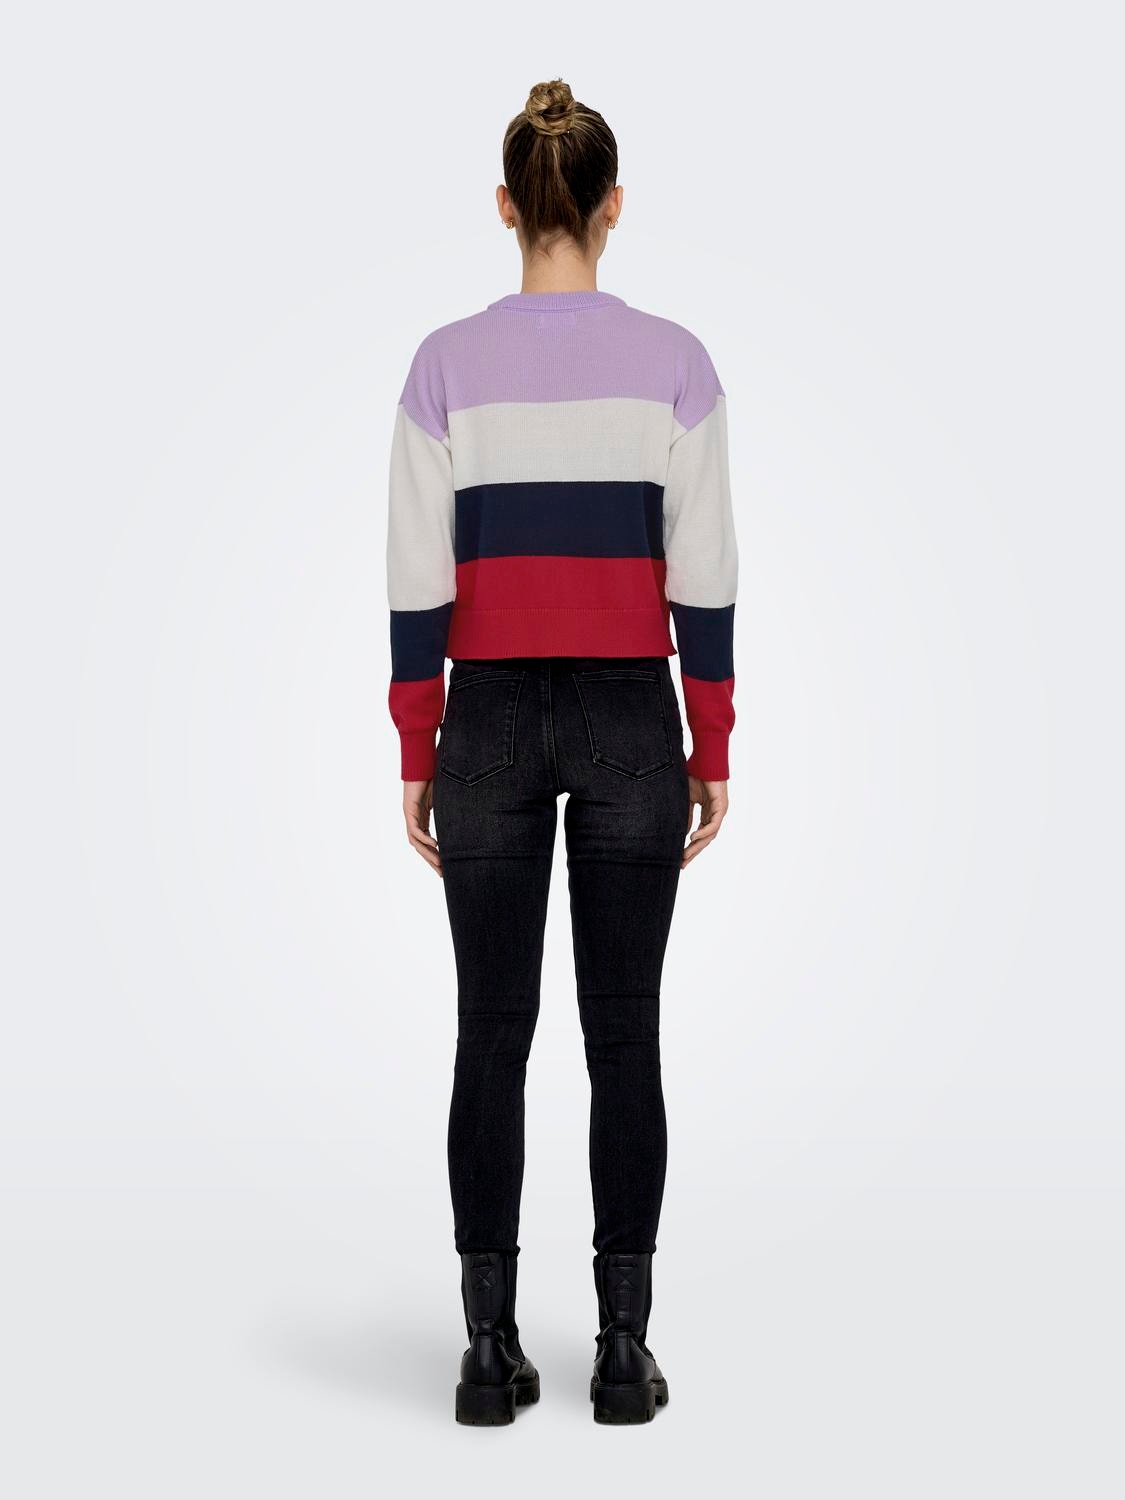 ONLY Rundhals Pullover -Lavendula - 15302922